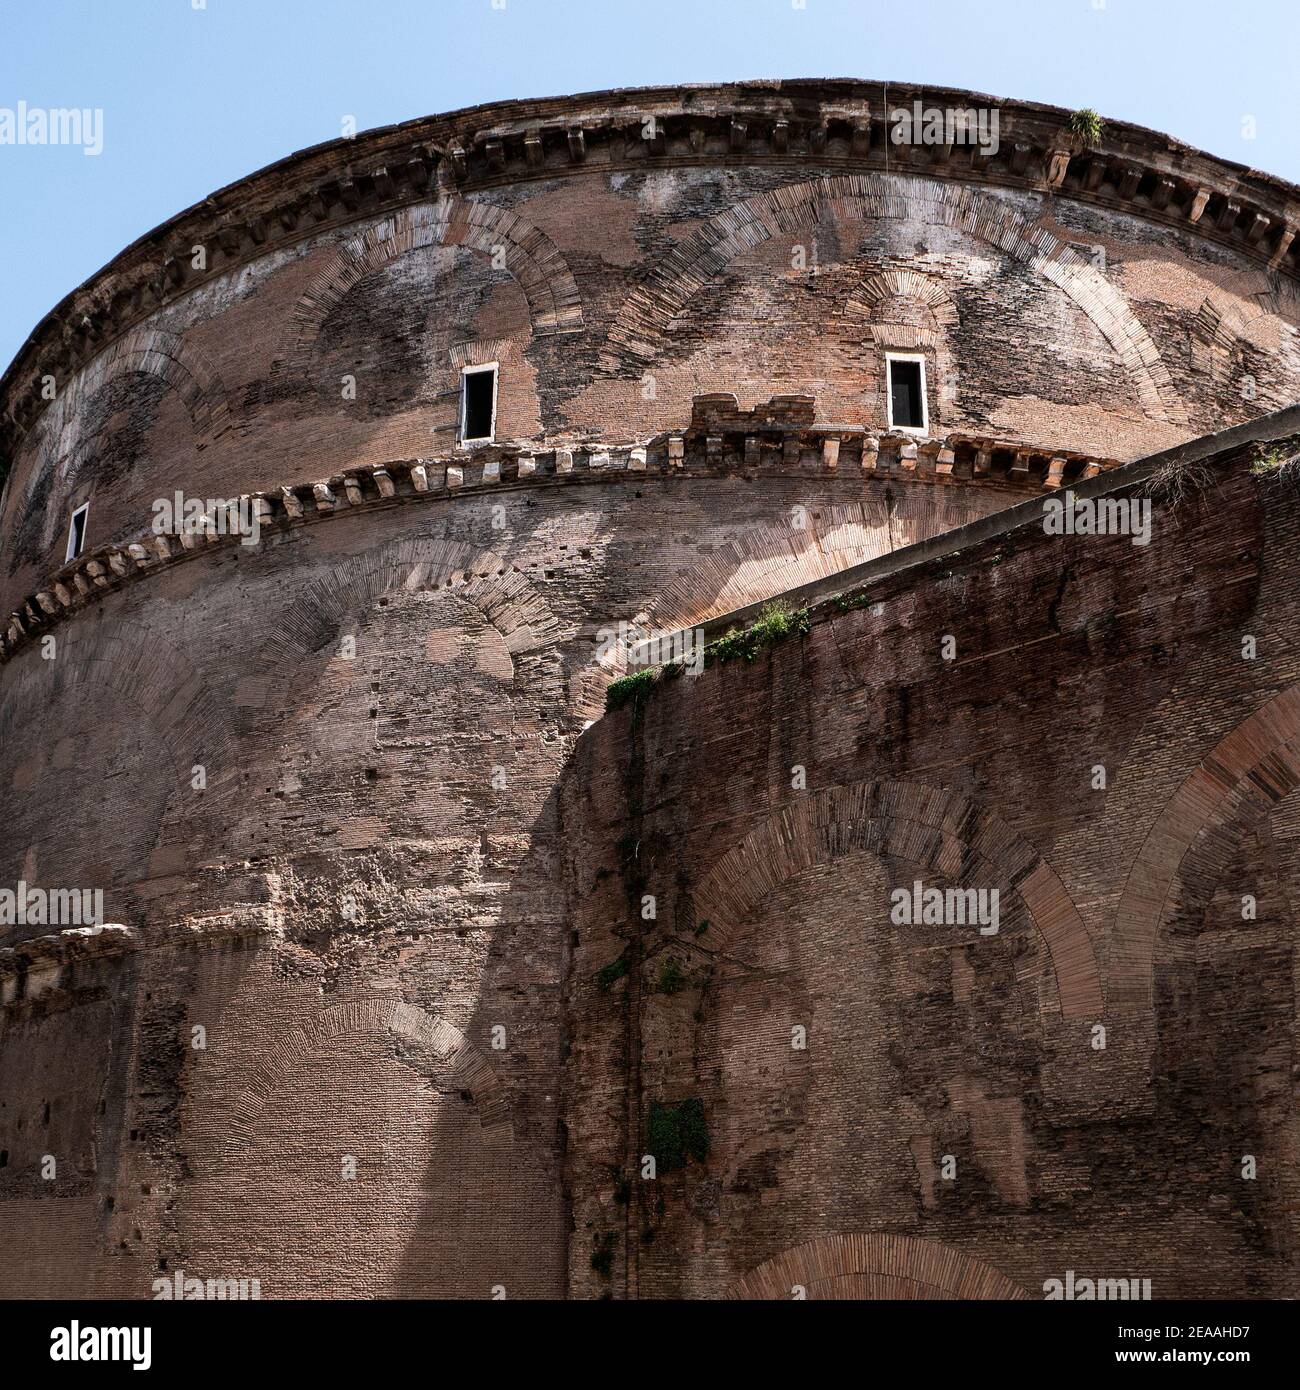 Pantheon, Rome,,backside exterior exposing filled in arches Stock Photo